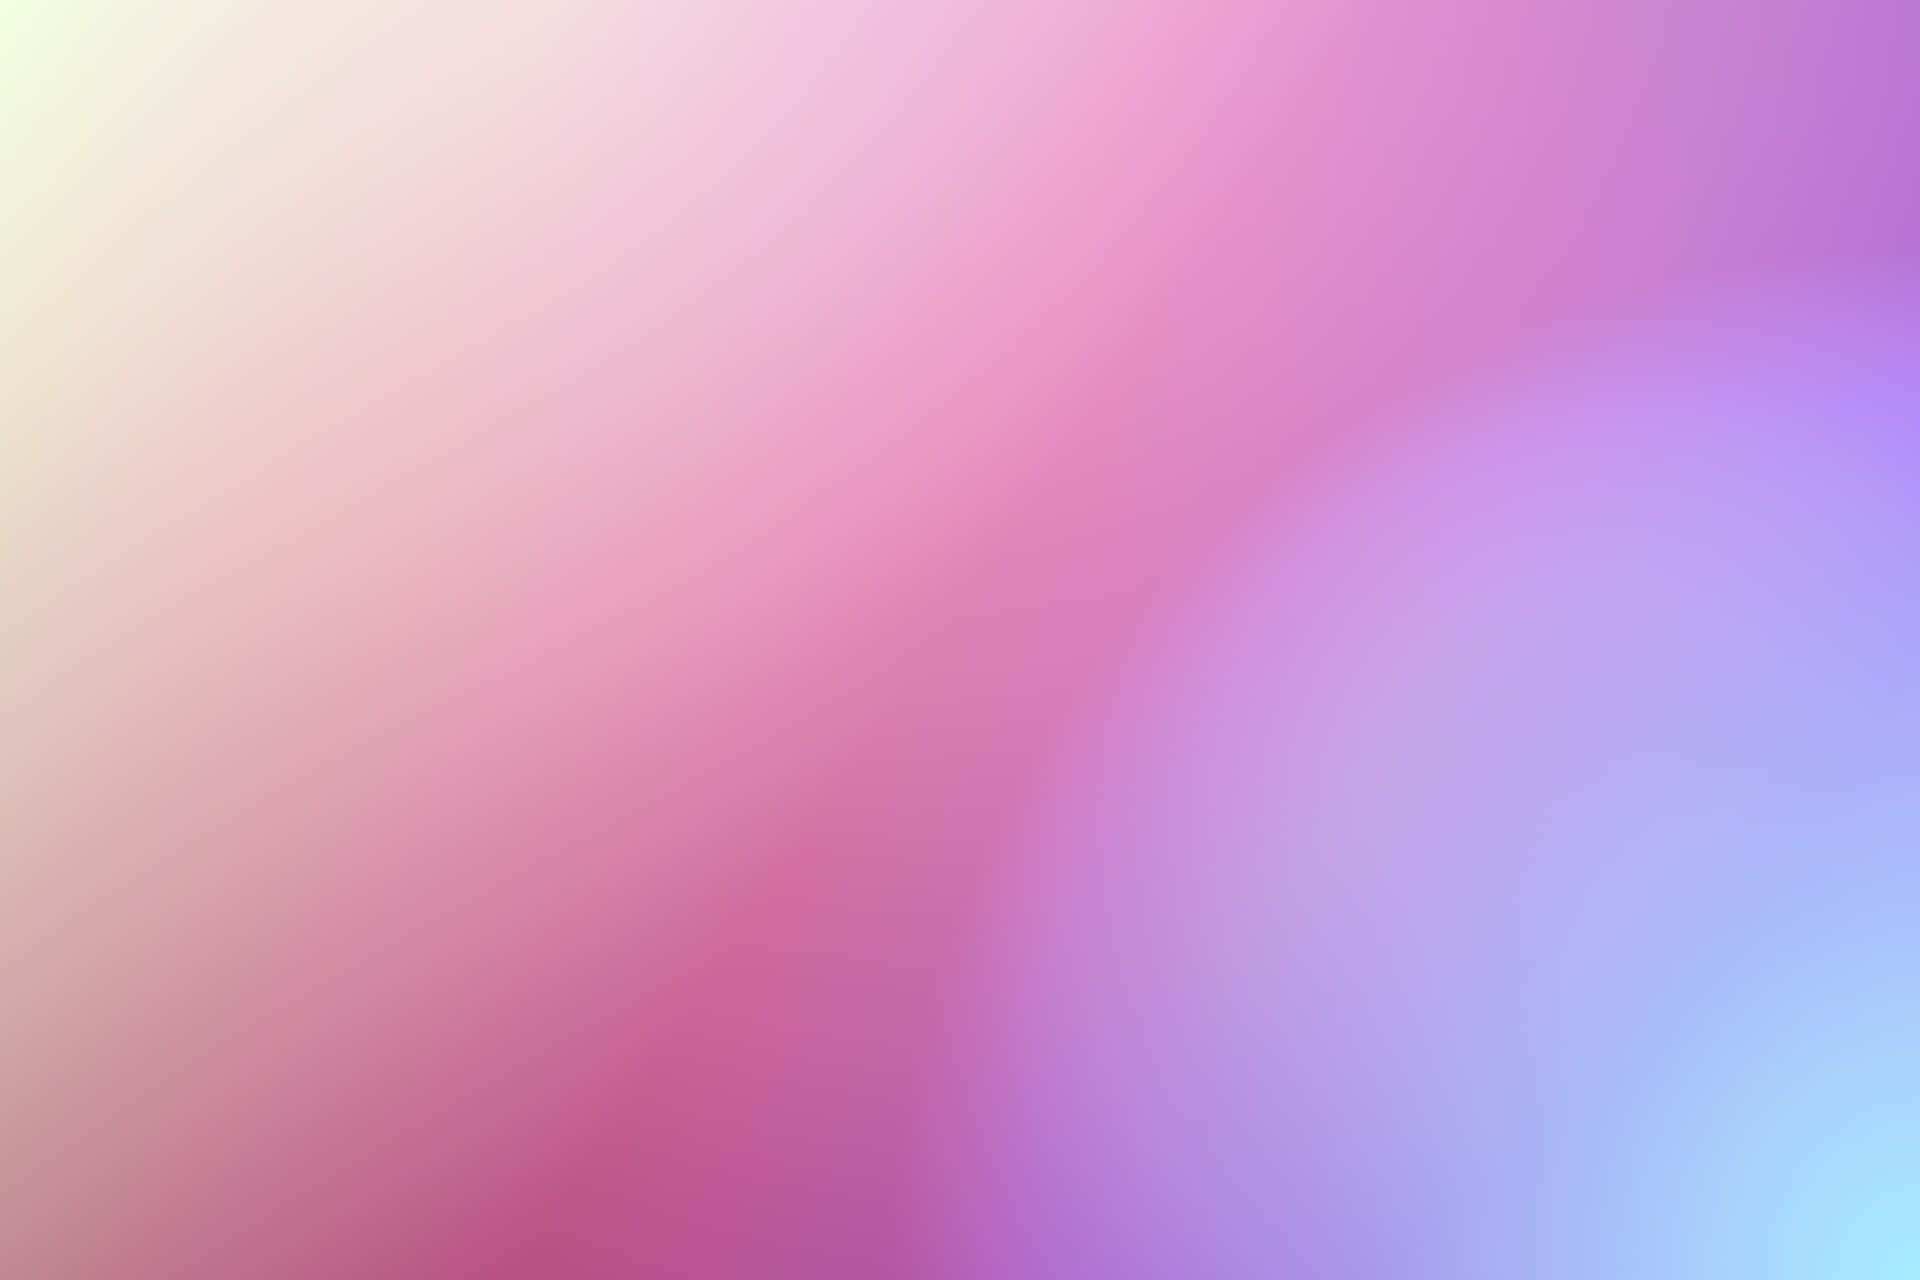 A Pink And Purple Blurred Background